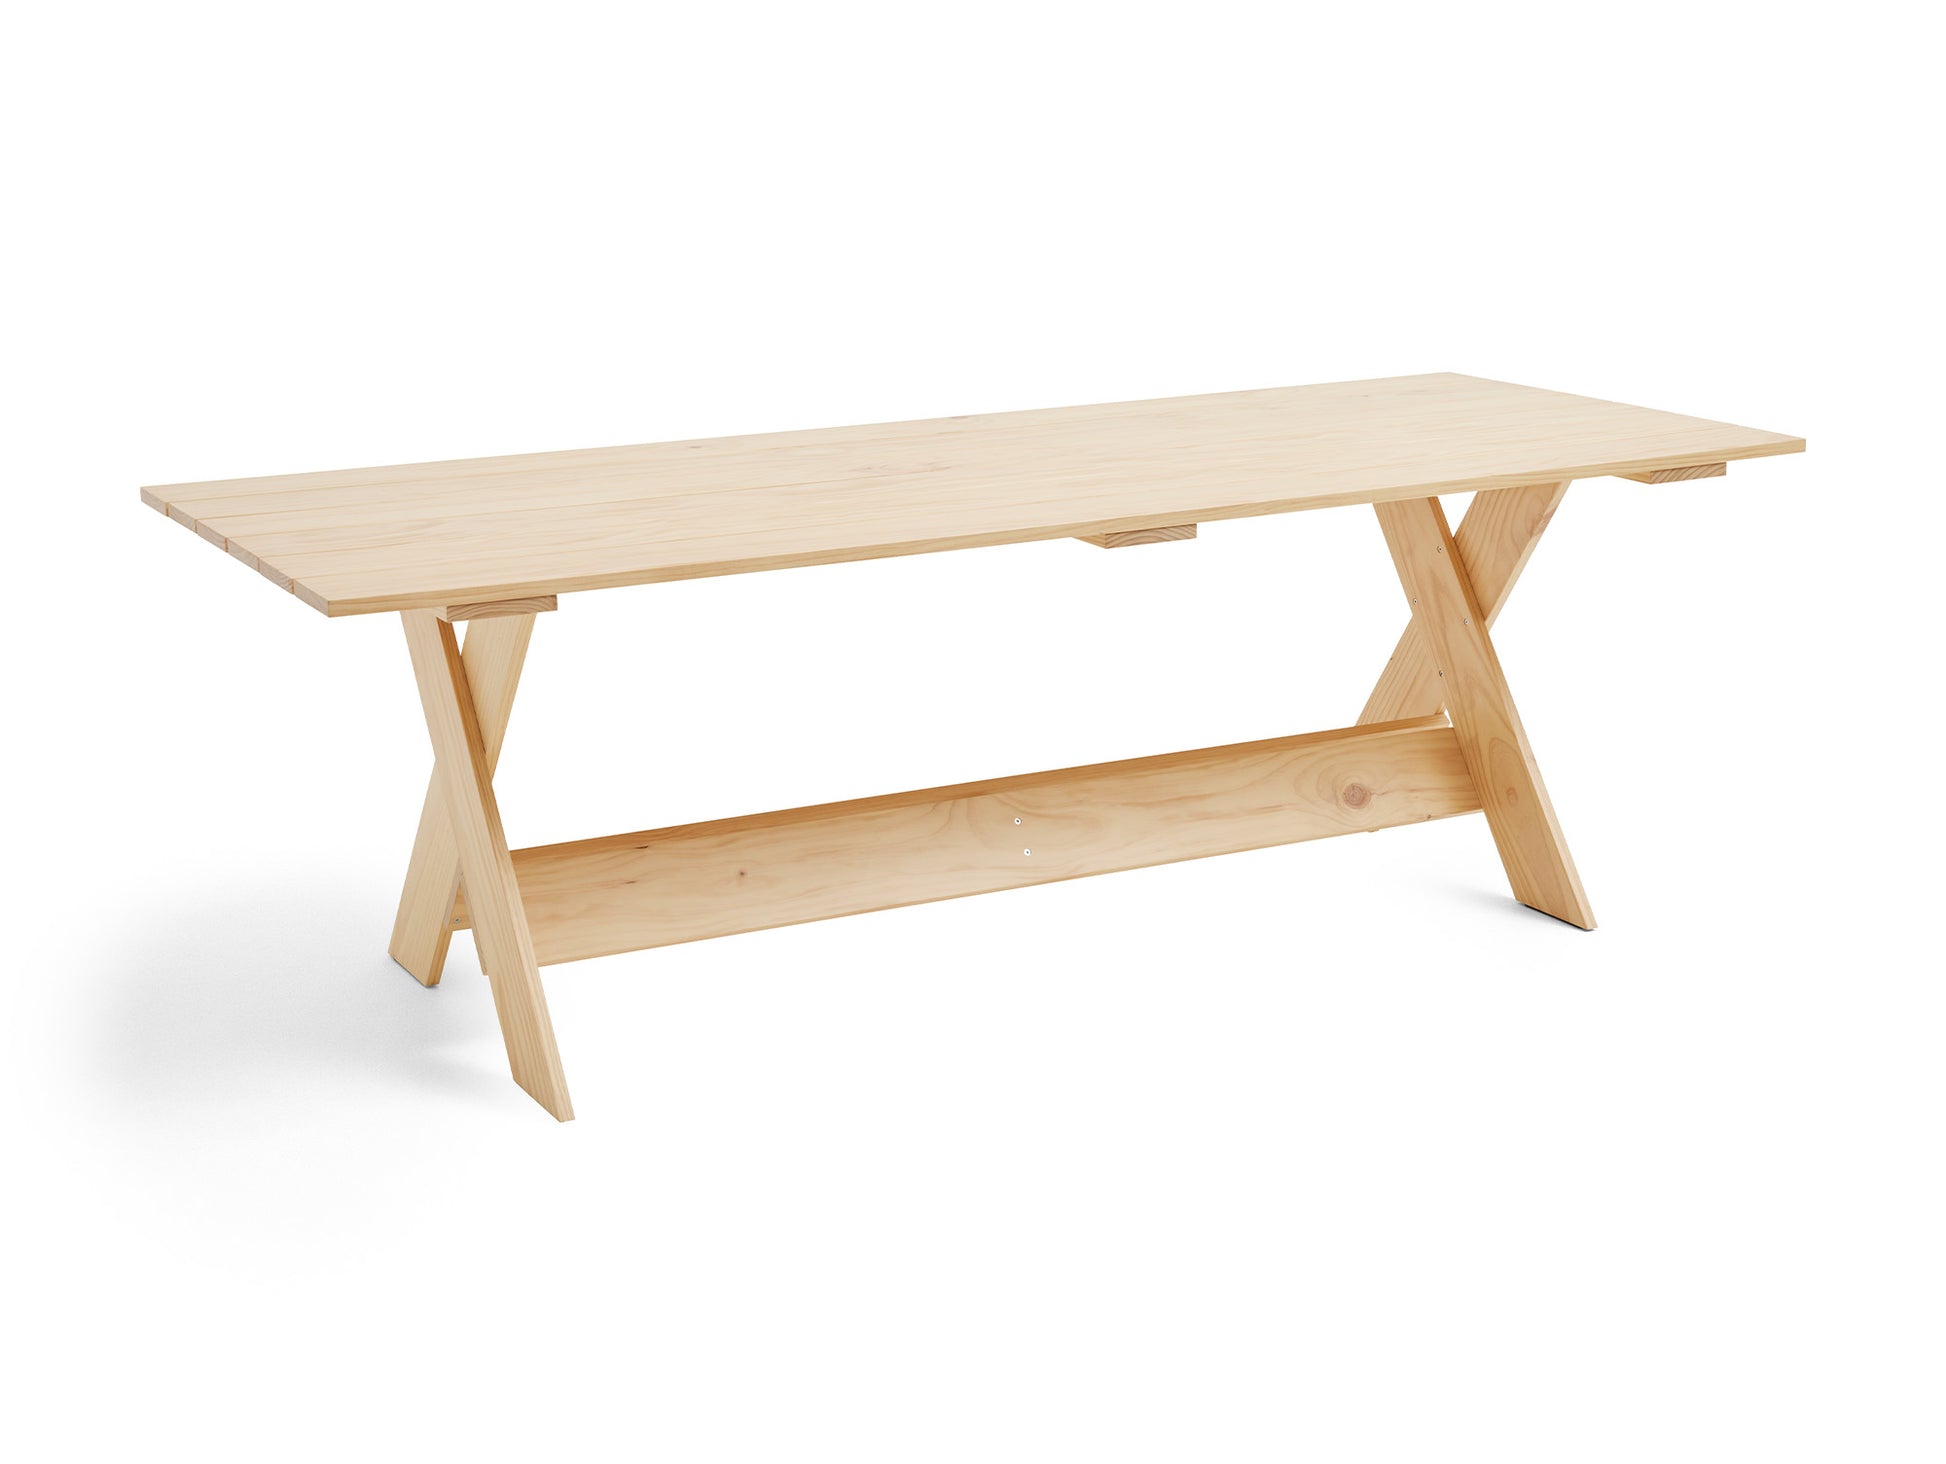 Crate Dining Table by HAY - Length: 230 cm / Lacquered Pinewood